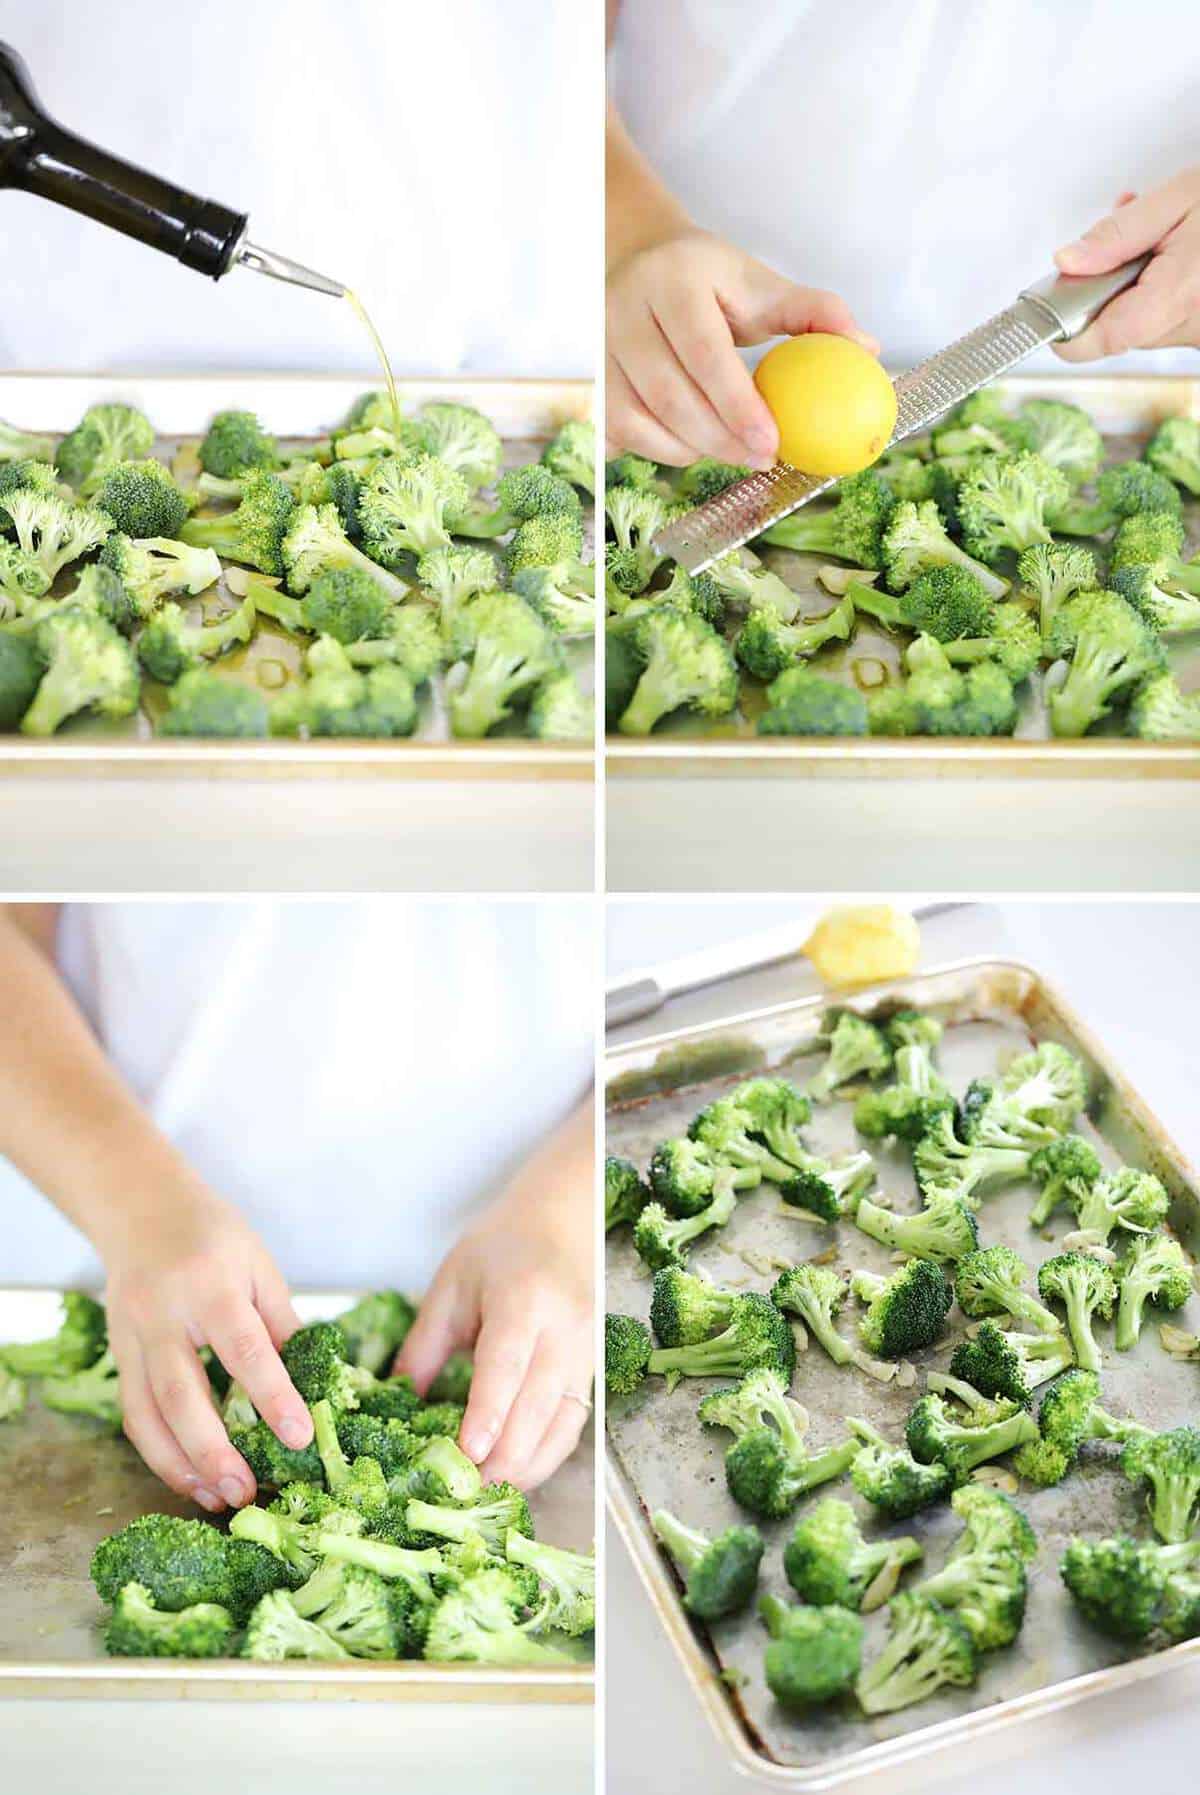 Drizzling olive oil and zesting lemon on a rimmed baking sheet of broccoli florets, tossing to coat.